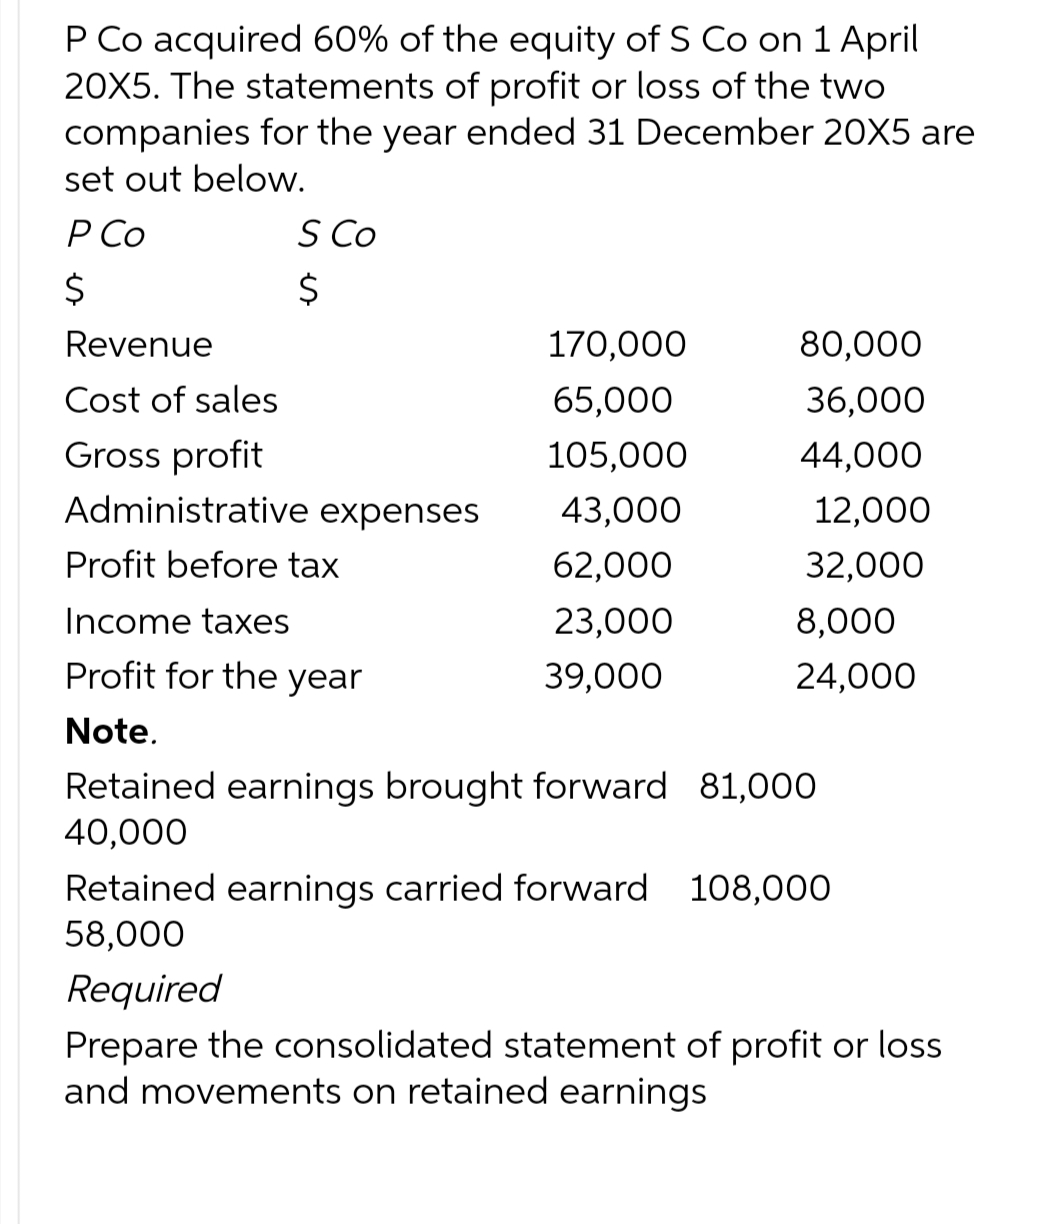 P Co acquired 60% of the equity of S Co on 1 April
20X5. The statements of profit or loss of the two
companies for the year ended 31 December 20X5 are
set out below.
P Co
$
S Co
Revenue
Cost of sales
Gross profit
Administrative expenses
Profit before tax
Income taxes
Profit for the year
Note.
170,000
65,000
105,000
43,000
62,000
23,000
39,000
80,000
36,000
44,000
12,000
32,000
8,000
24,000
Retained earnings brought forward 81,000
40,000
Retained earnings carried forward 108,000
58,000
Required
Prepare the consolidated statement of profit or loss
and movements on retained earnings